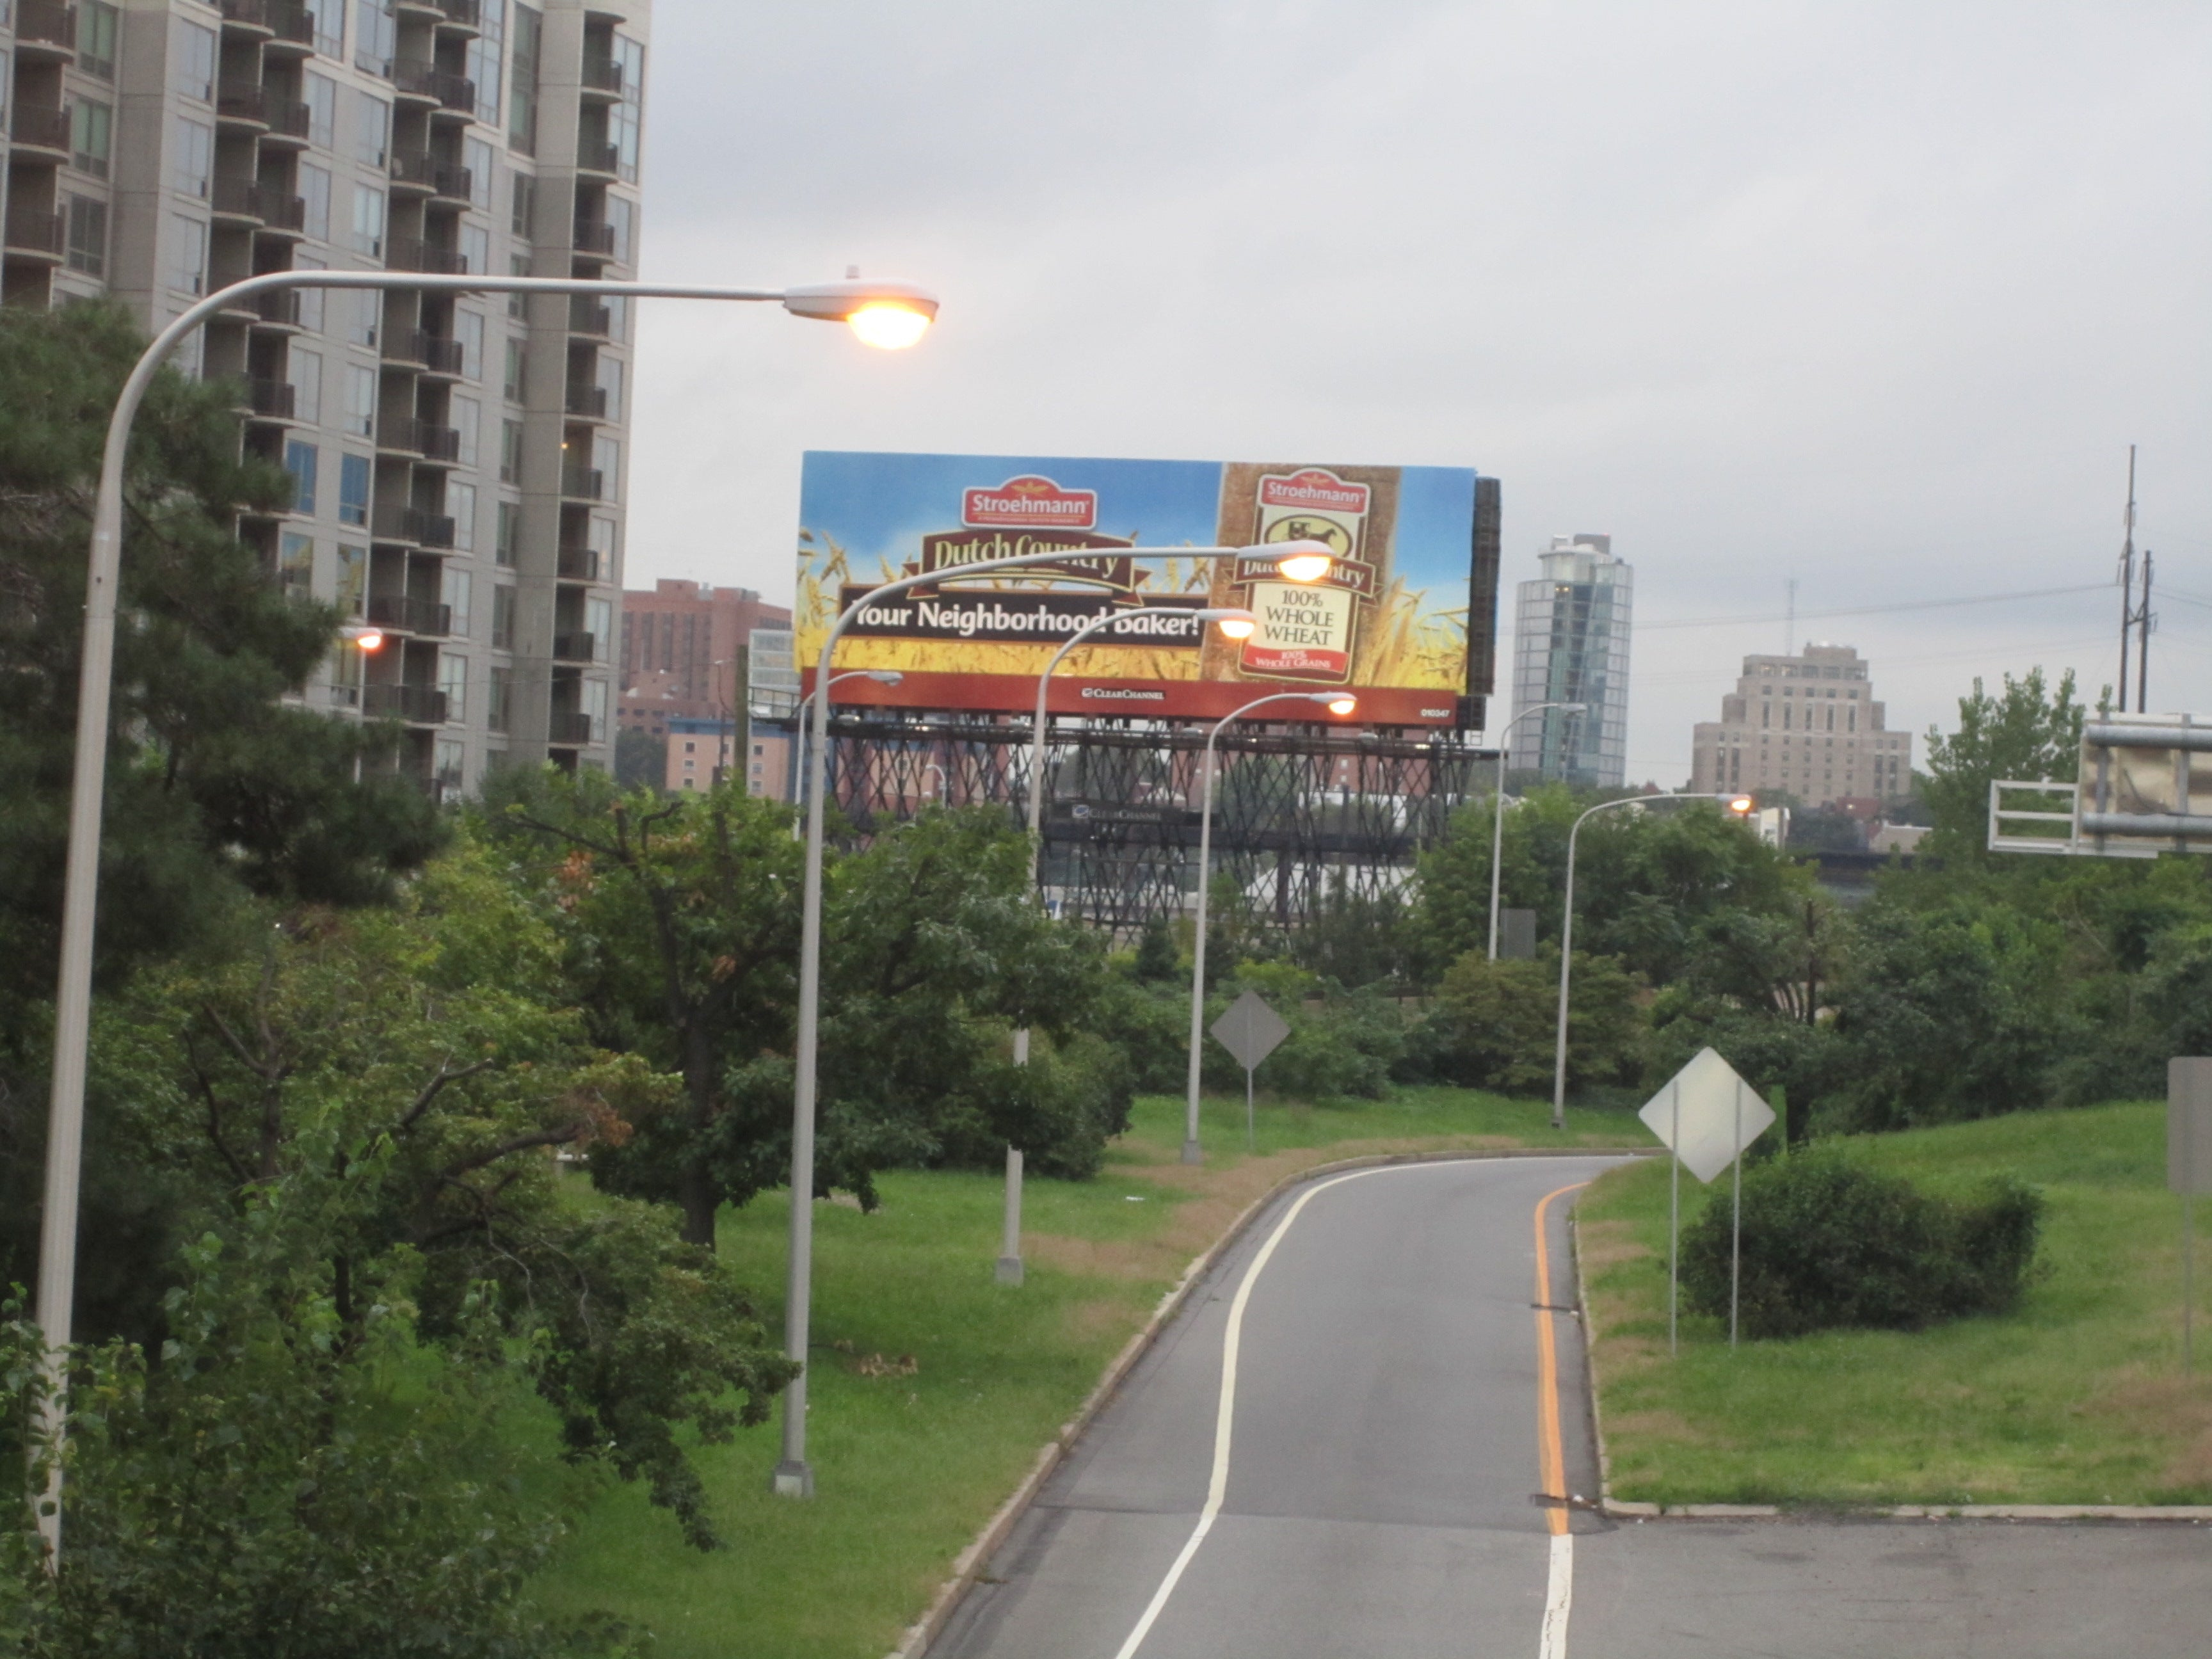 The newly cleared view of the billboard near 23rd and the Vine St. Expressway.